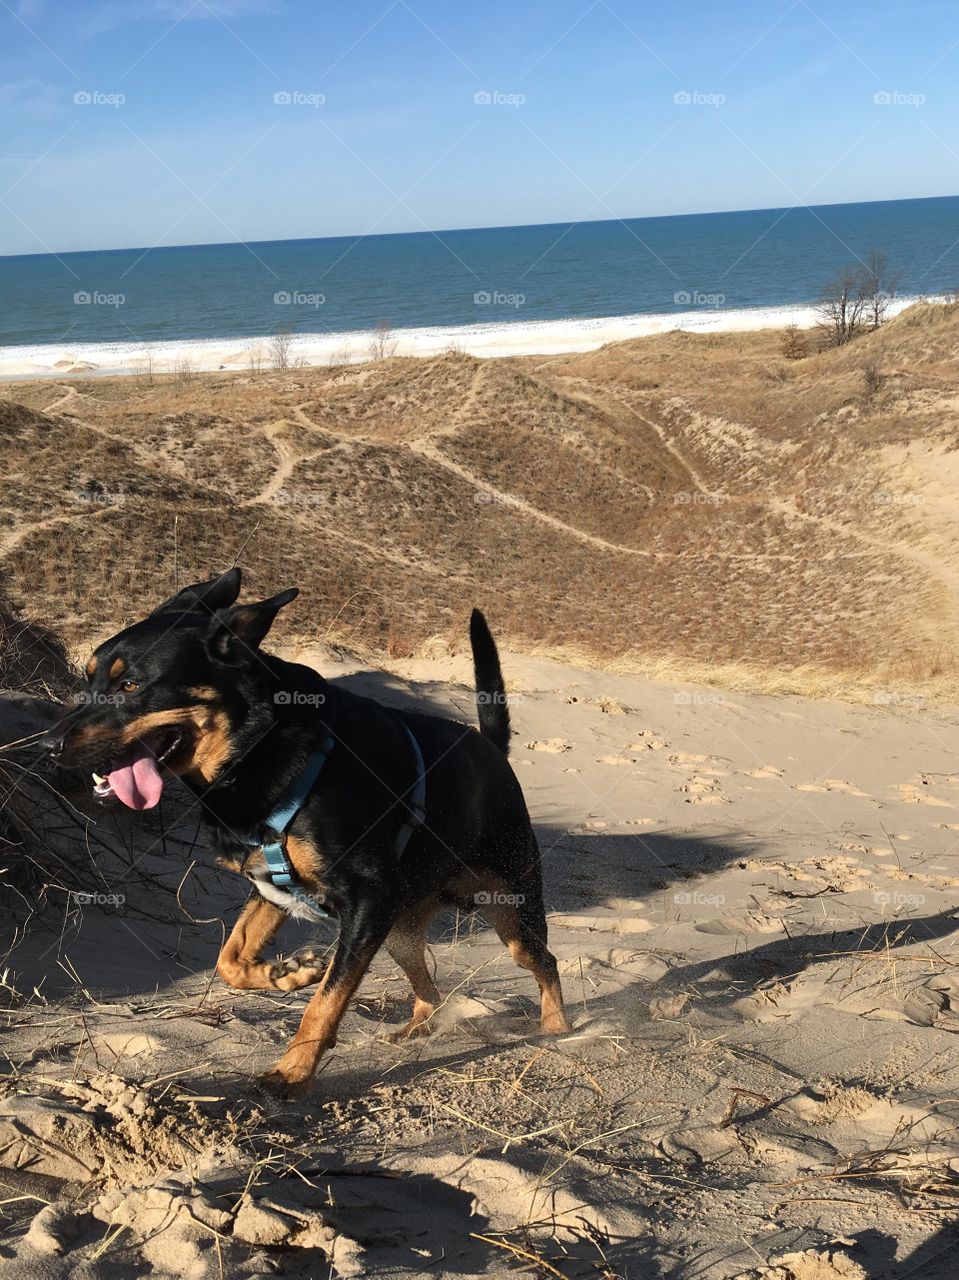 Puppy bliss! Running up and down lake michigans sand dunes 